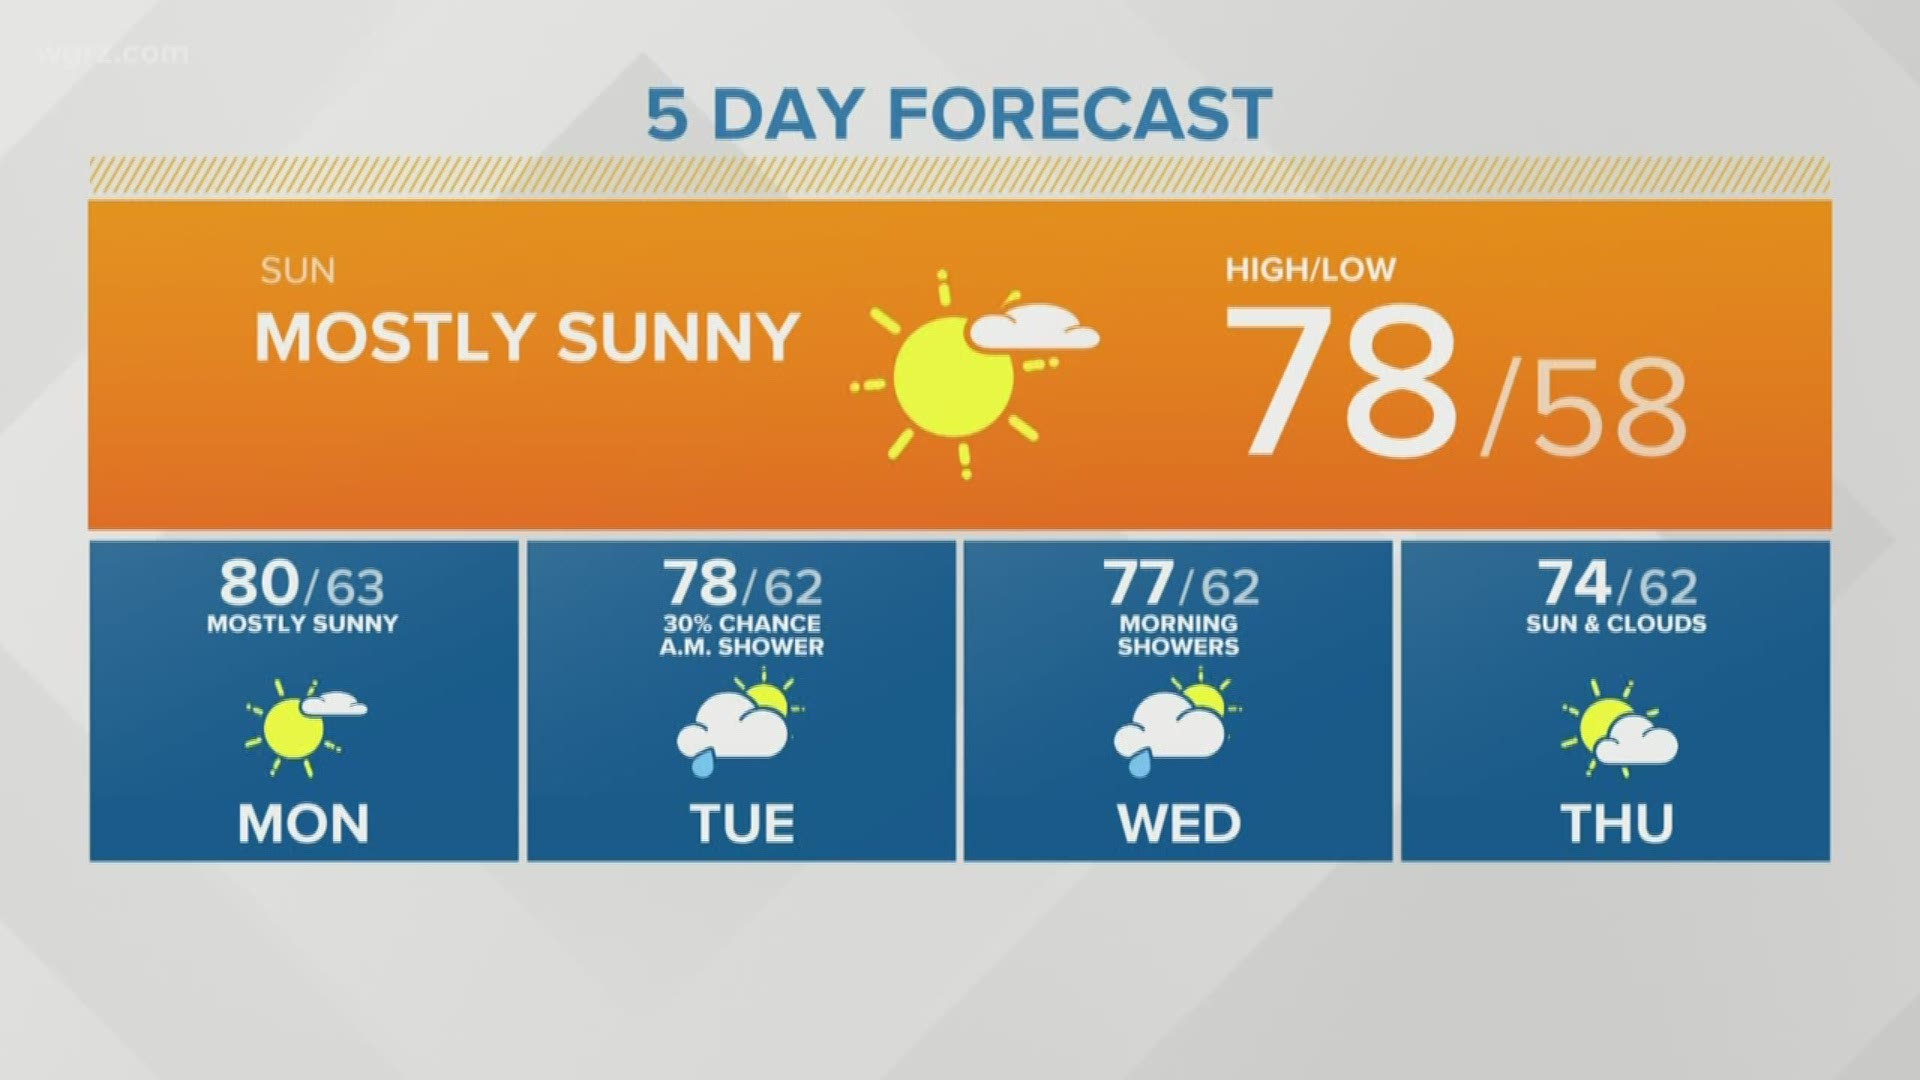 Sunday will be a little warmer and sunnier, high of 79. Some patchy fog early morning south.